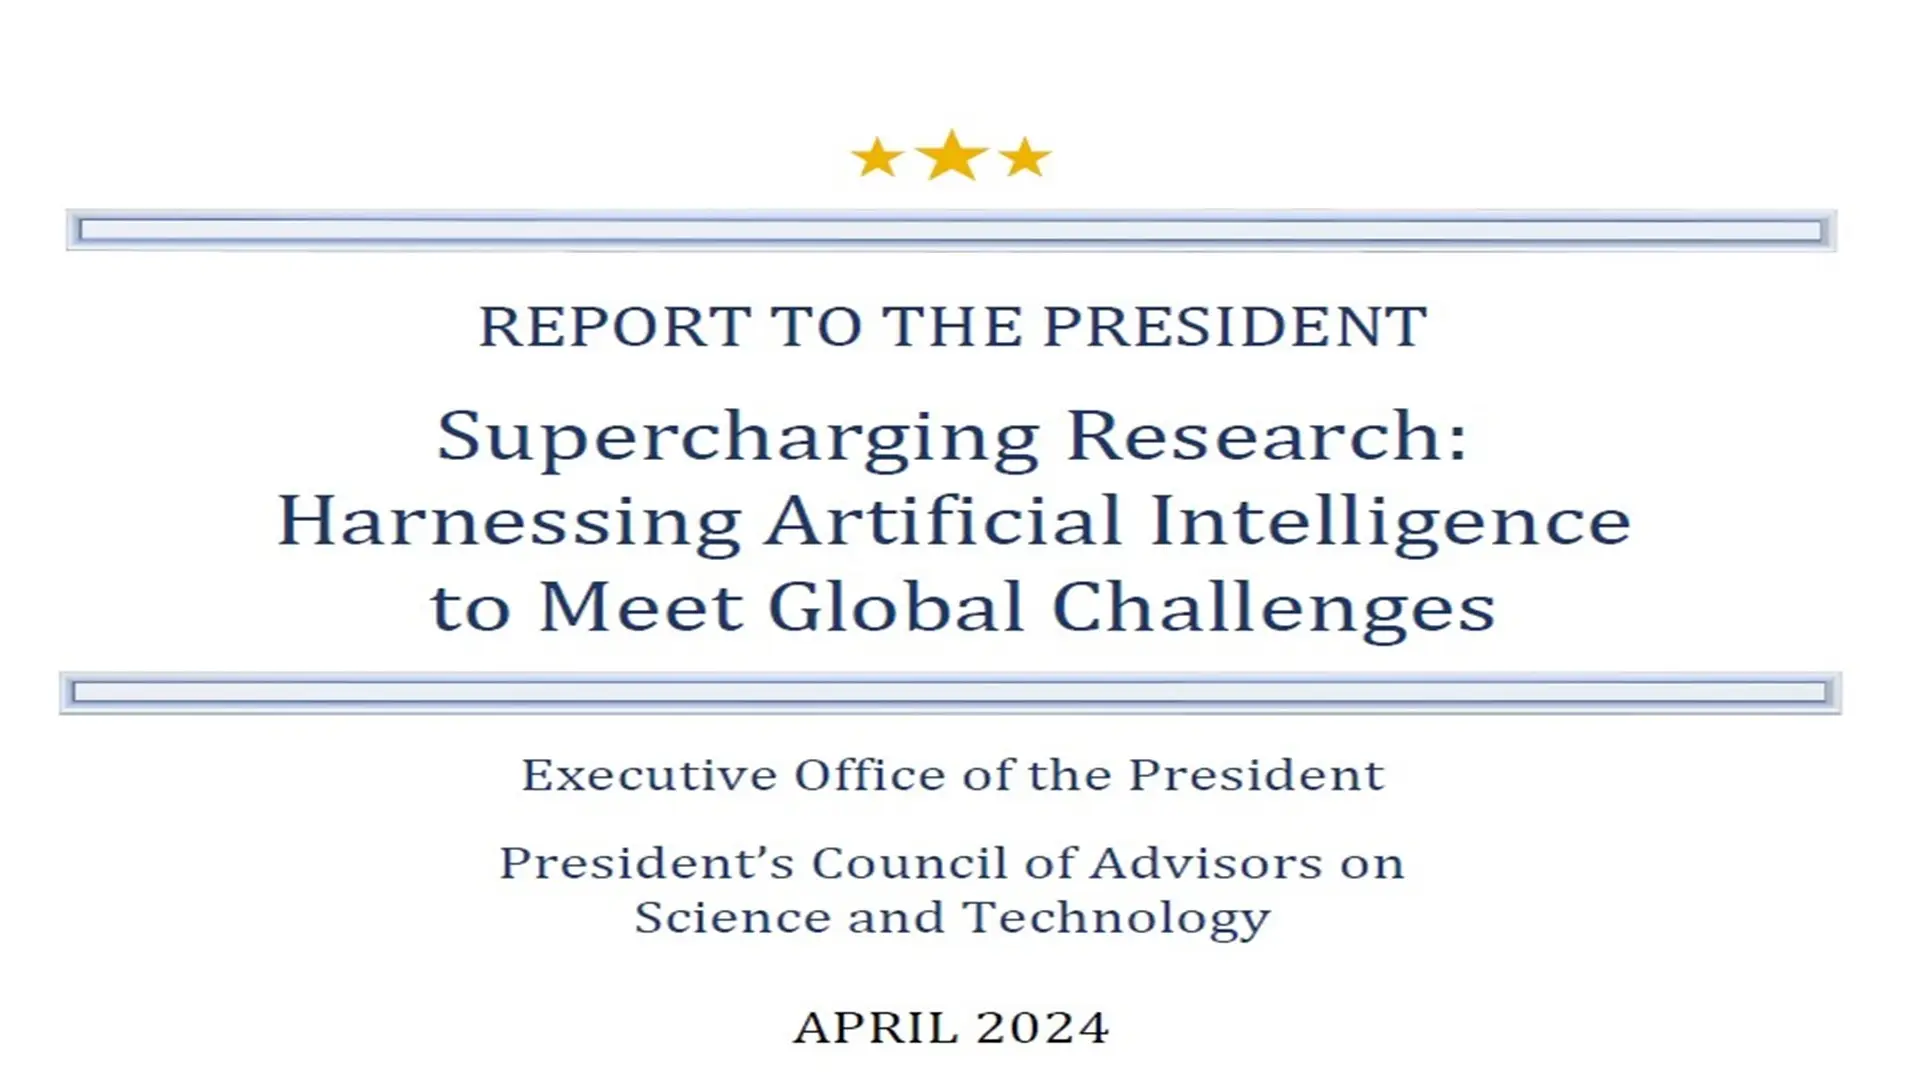 Supercharging Research:
Harnessing Artificial Intelligence
to Meet Global Challenges